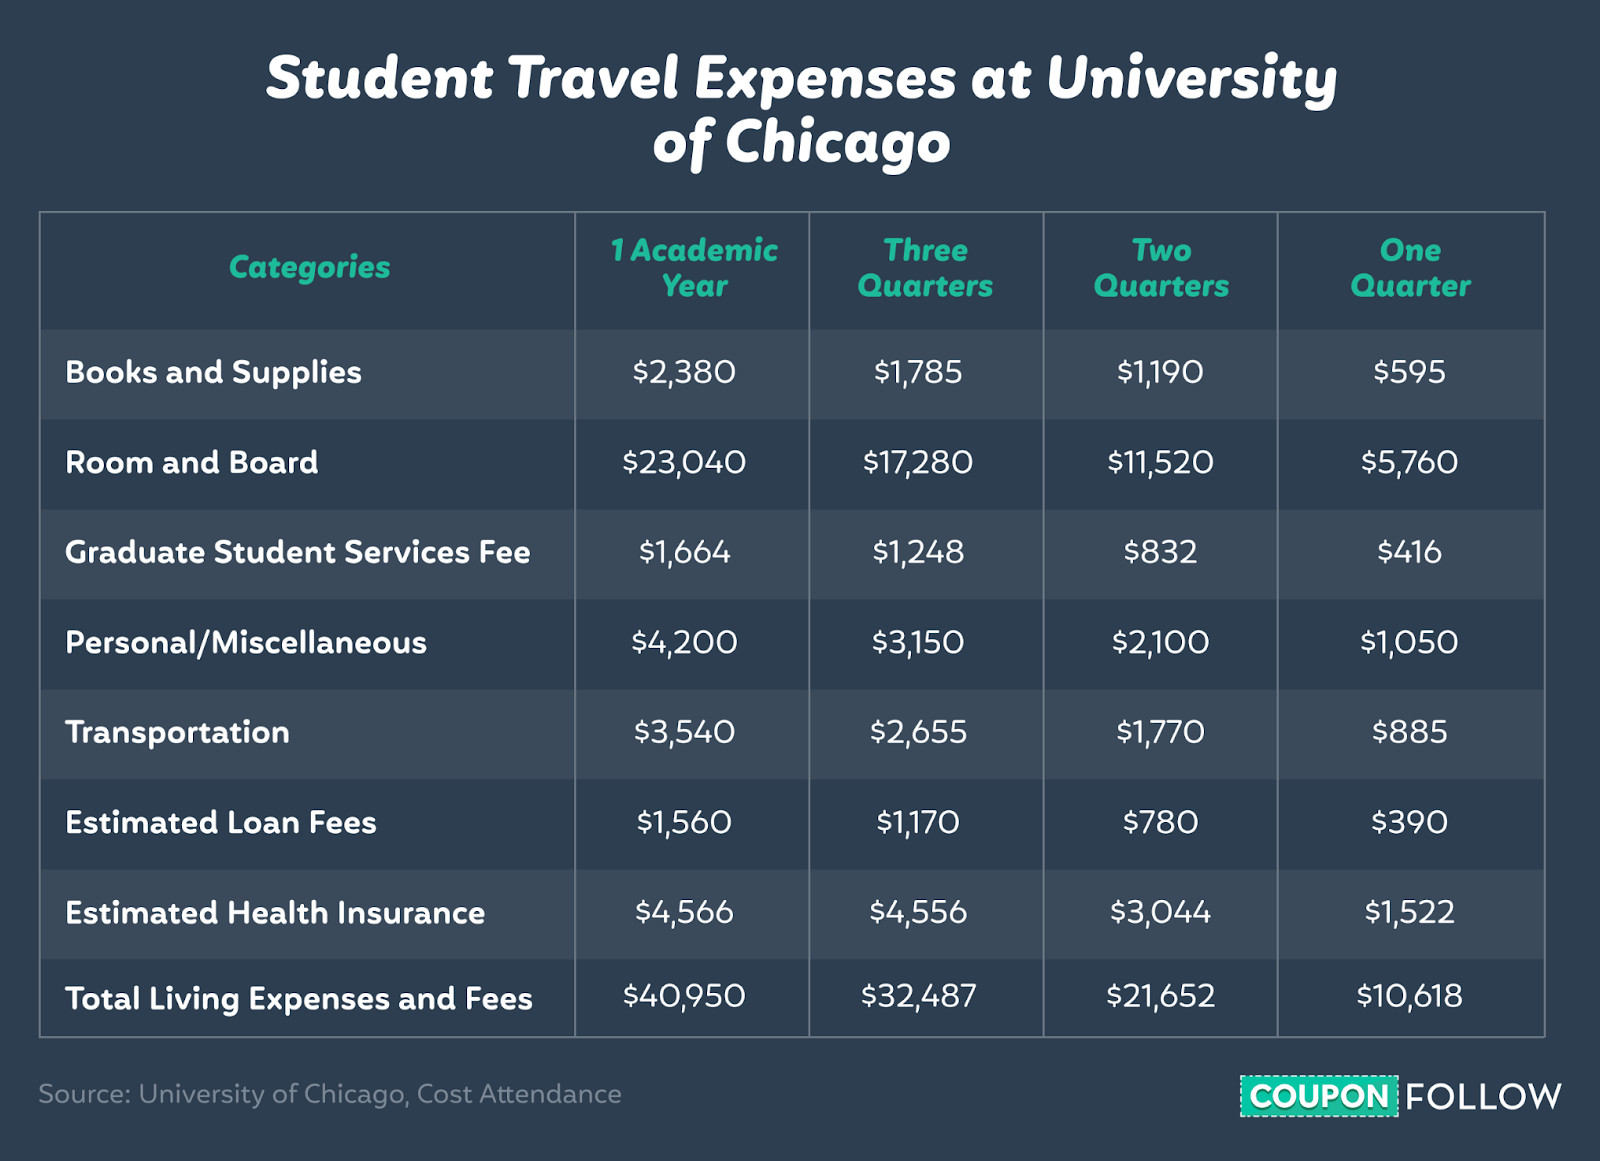 
Table showing student living costs at University of Chicago for 2021-22.
University of Chicago, Cost Attendance
https://financialaid.uchicago.edu/graduate/costs/cost-attendance